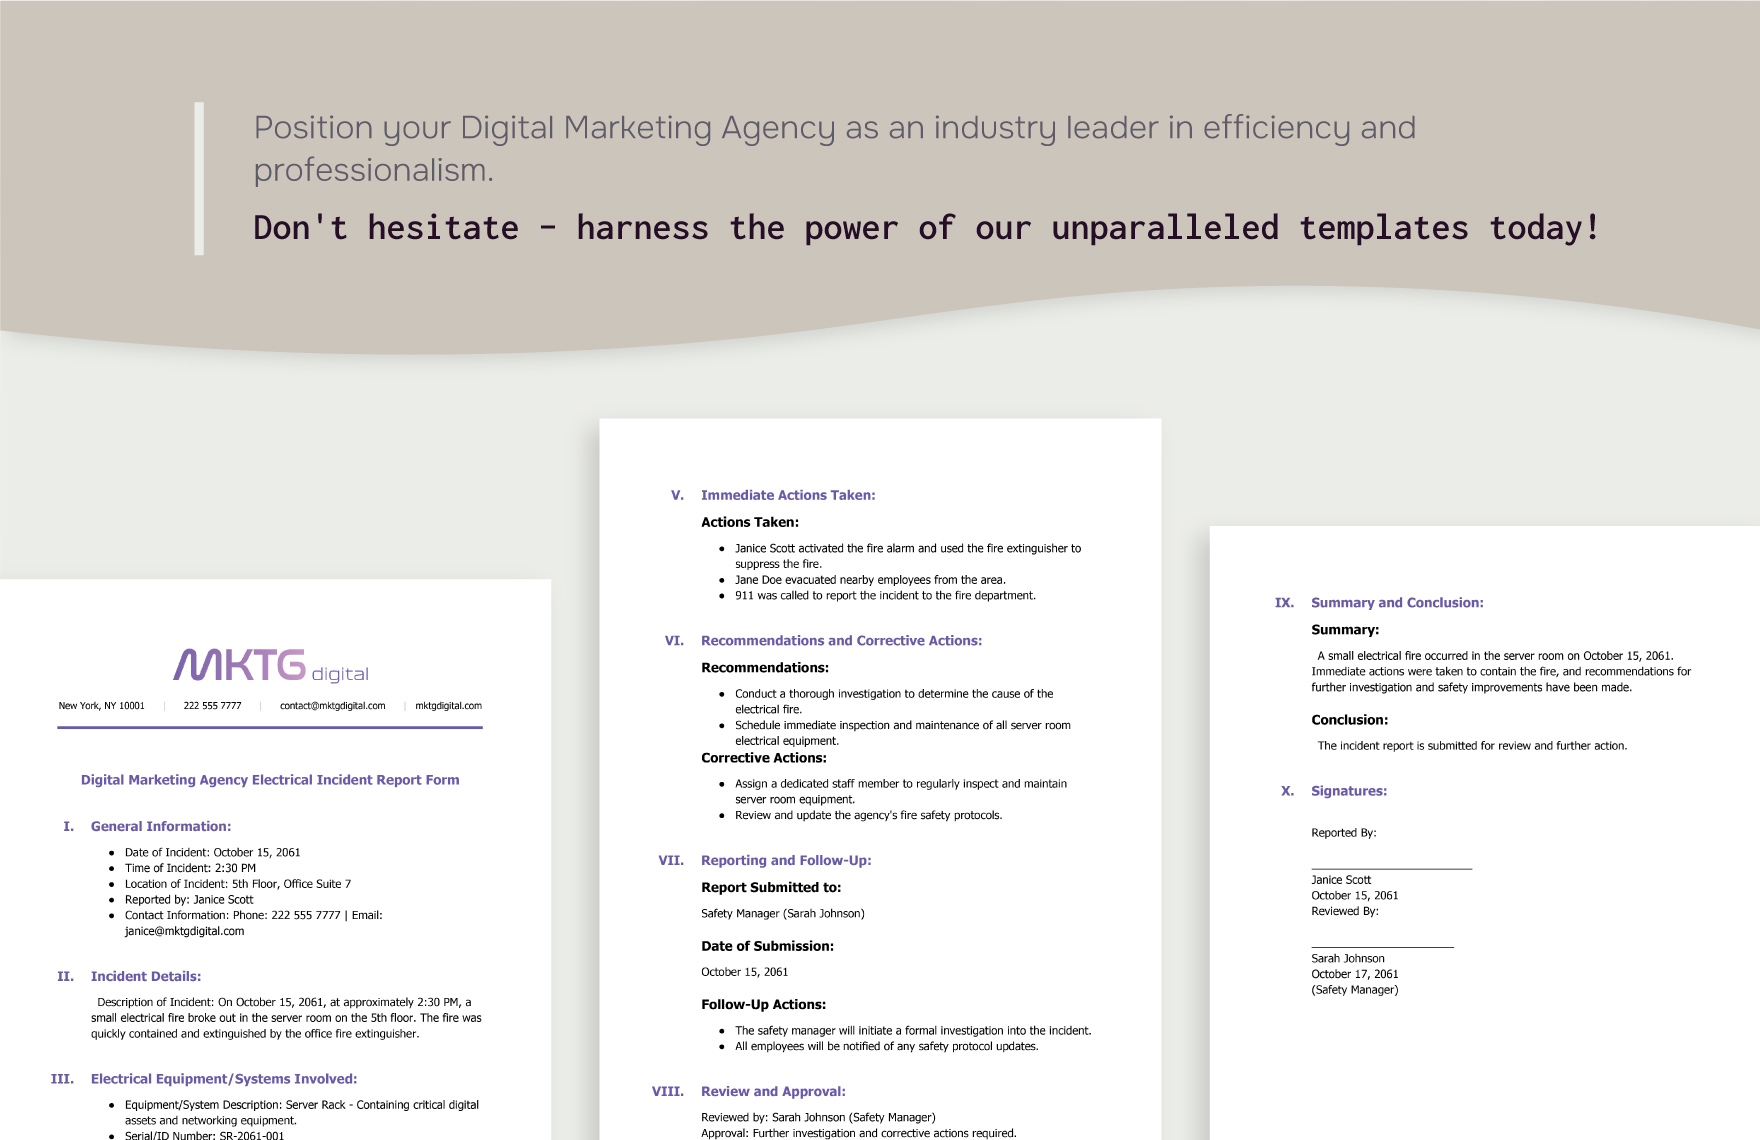 Digital Marketing Agency Electrical Incident Report Form Template